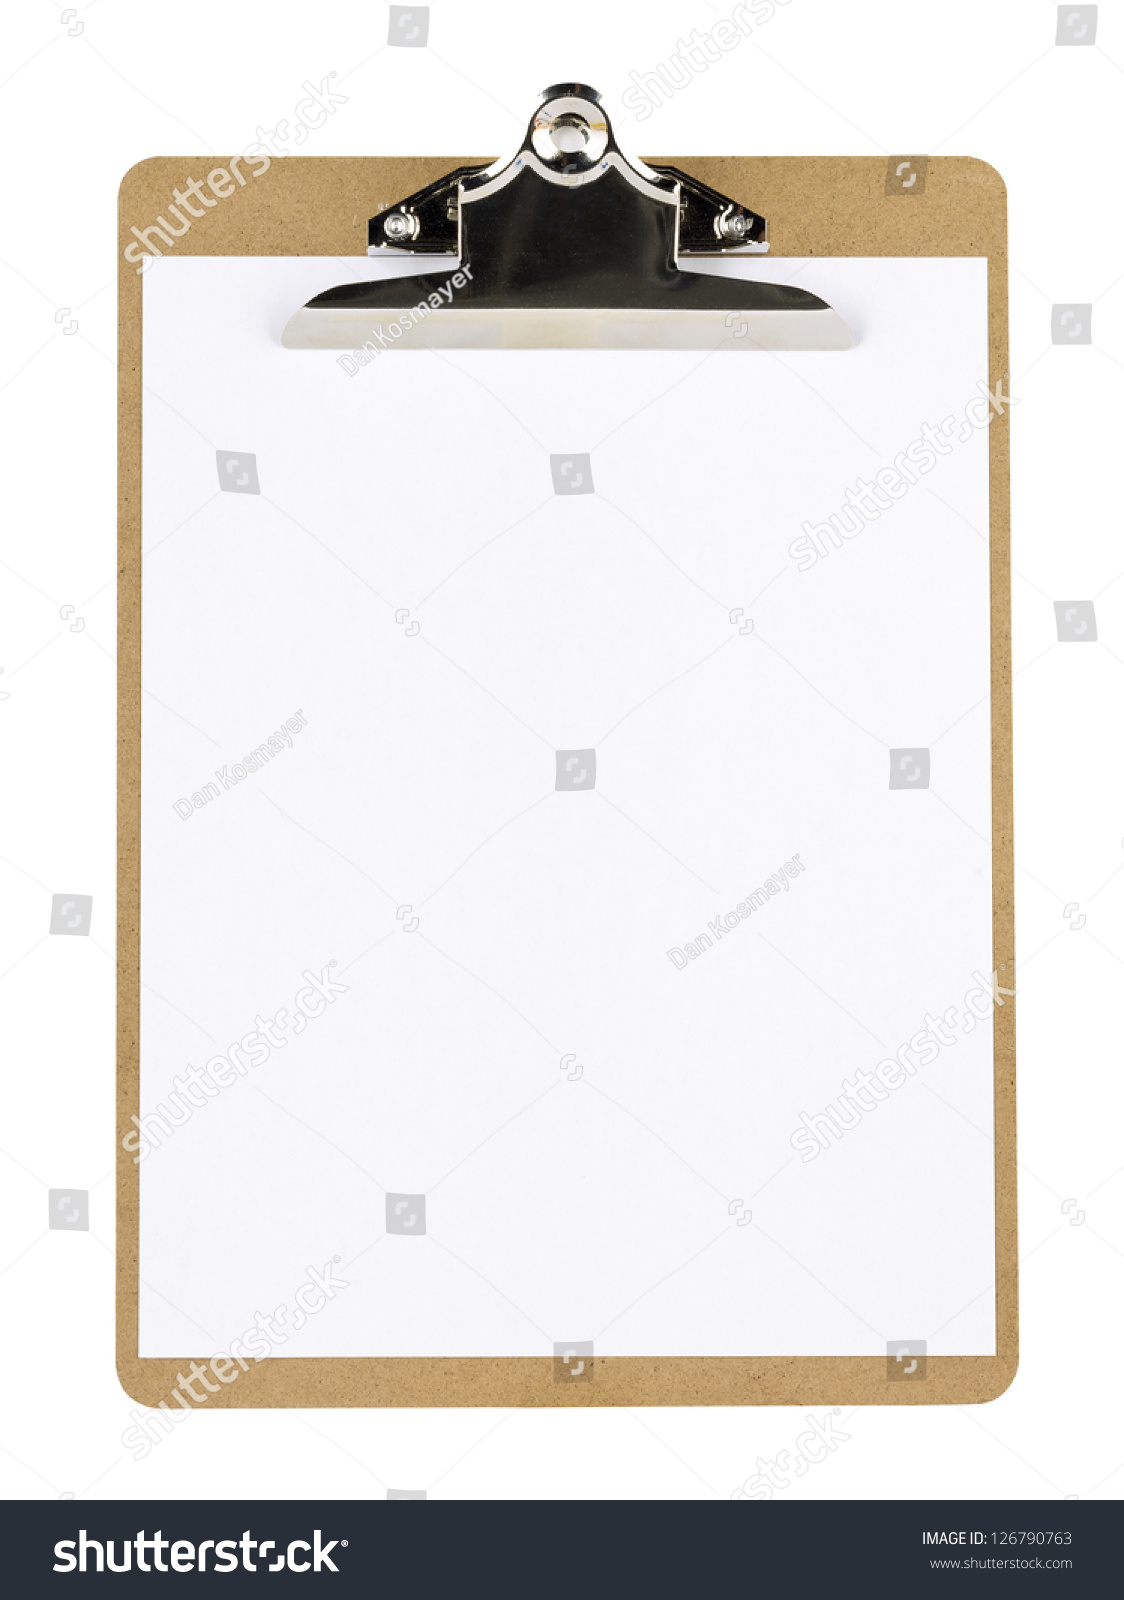 Close-up image of a notepad with blank paper. #126790763